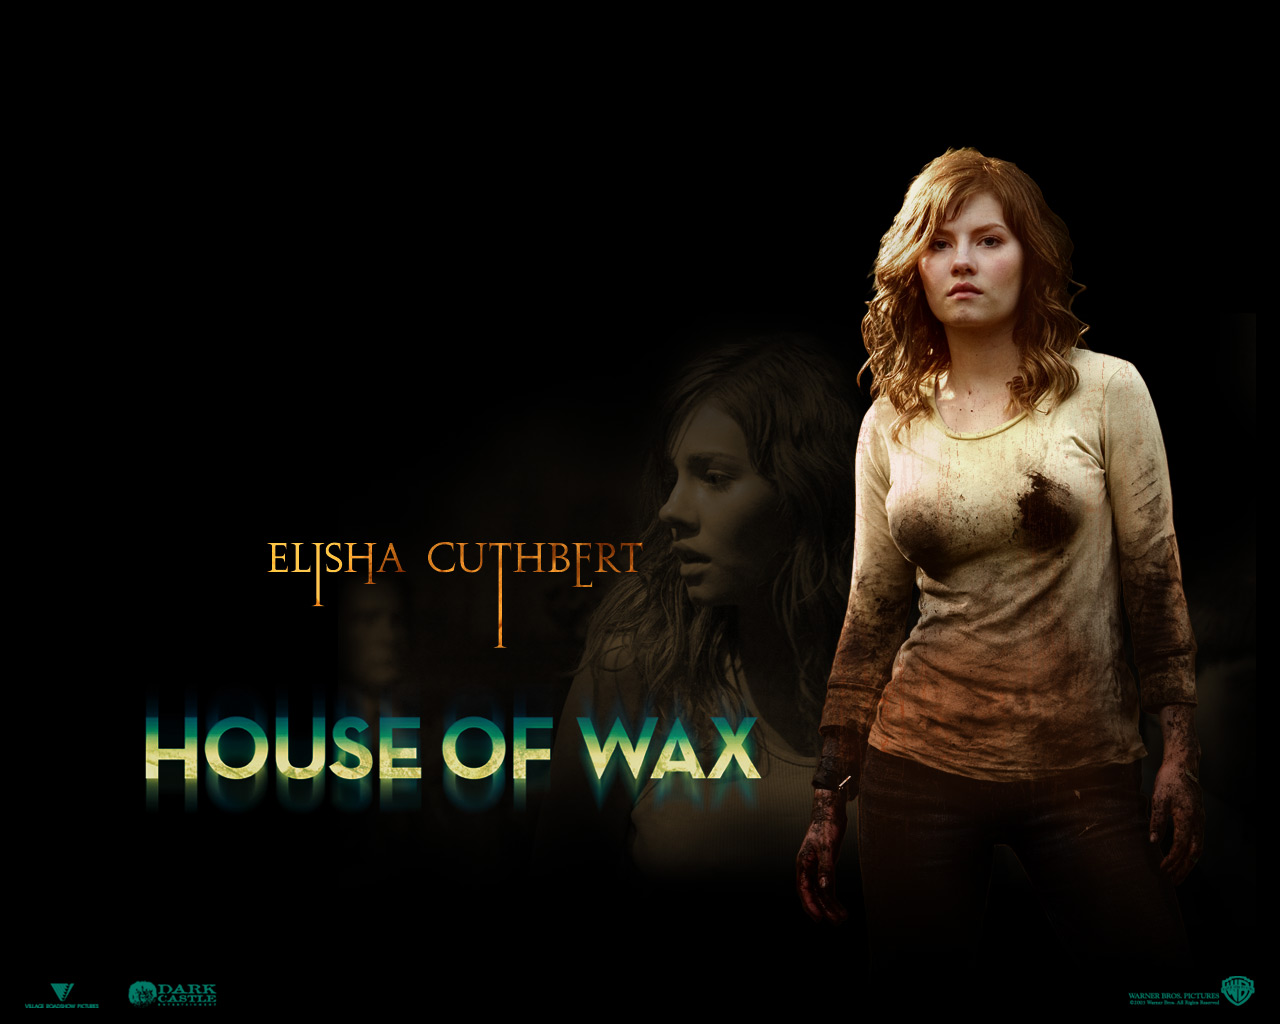 Download HQ House Of Wax wallpaper / Movies / 1280x1024